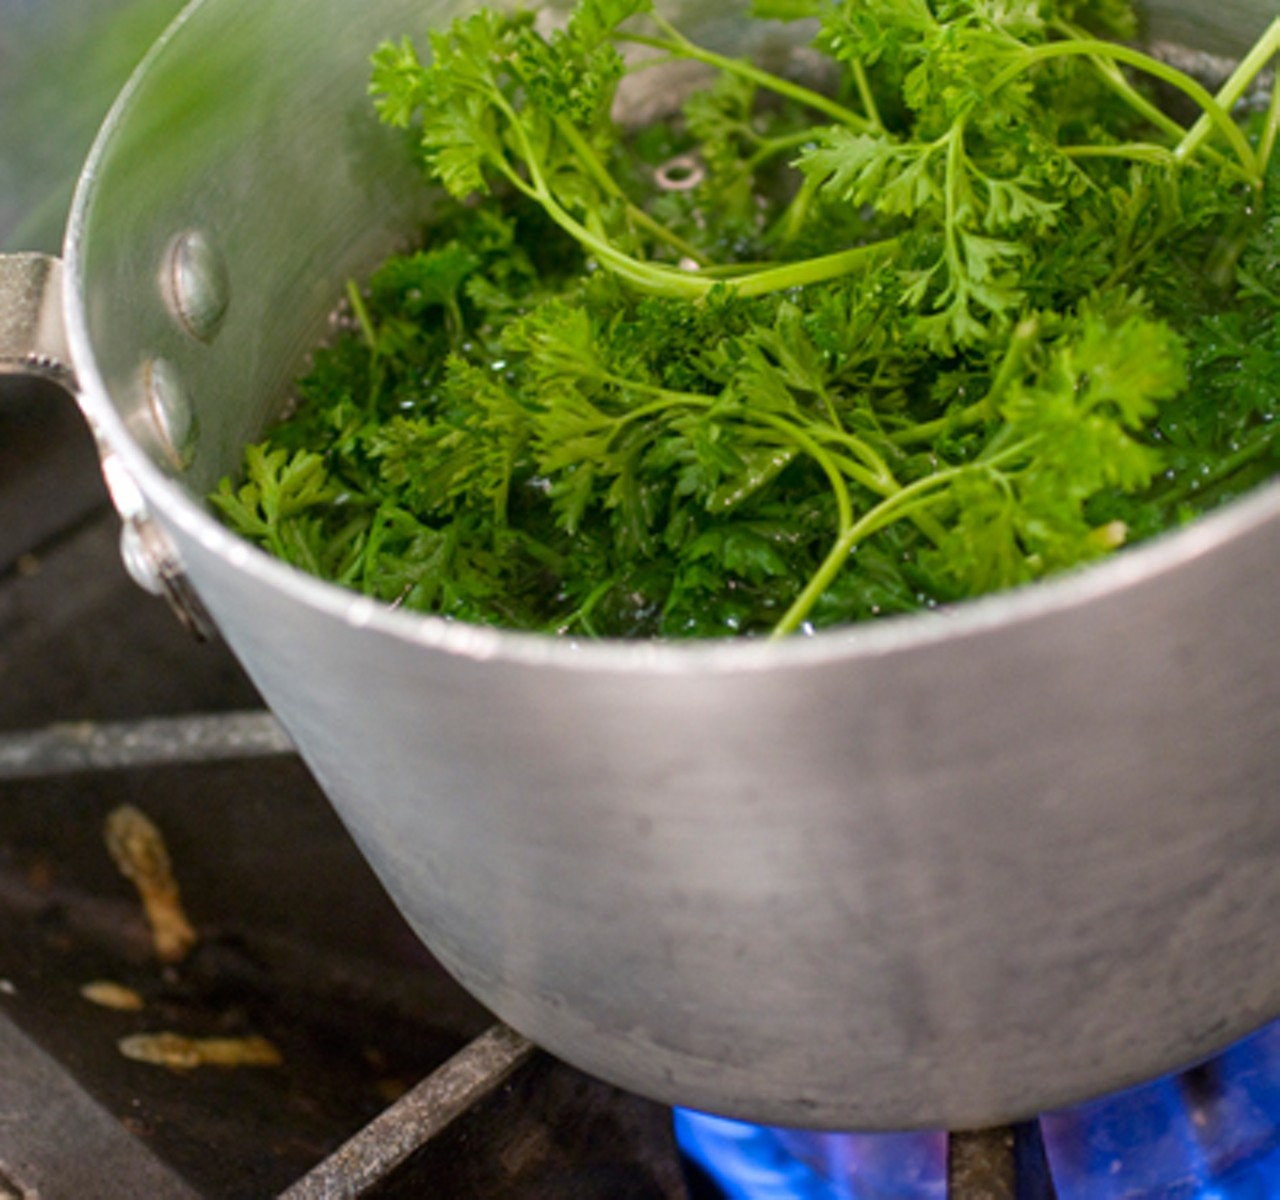 Blanching parsley. Read Ian Froeb's review: "Power Steering: Long a fixture across the river, Andria's Steakhouse opts for westward expansion."